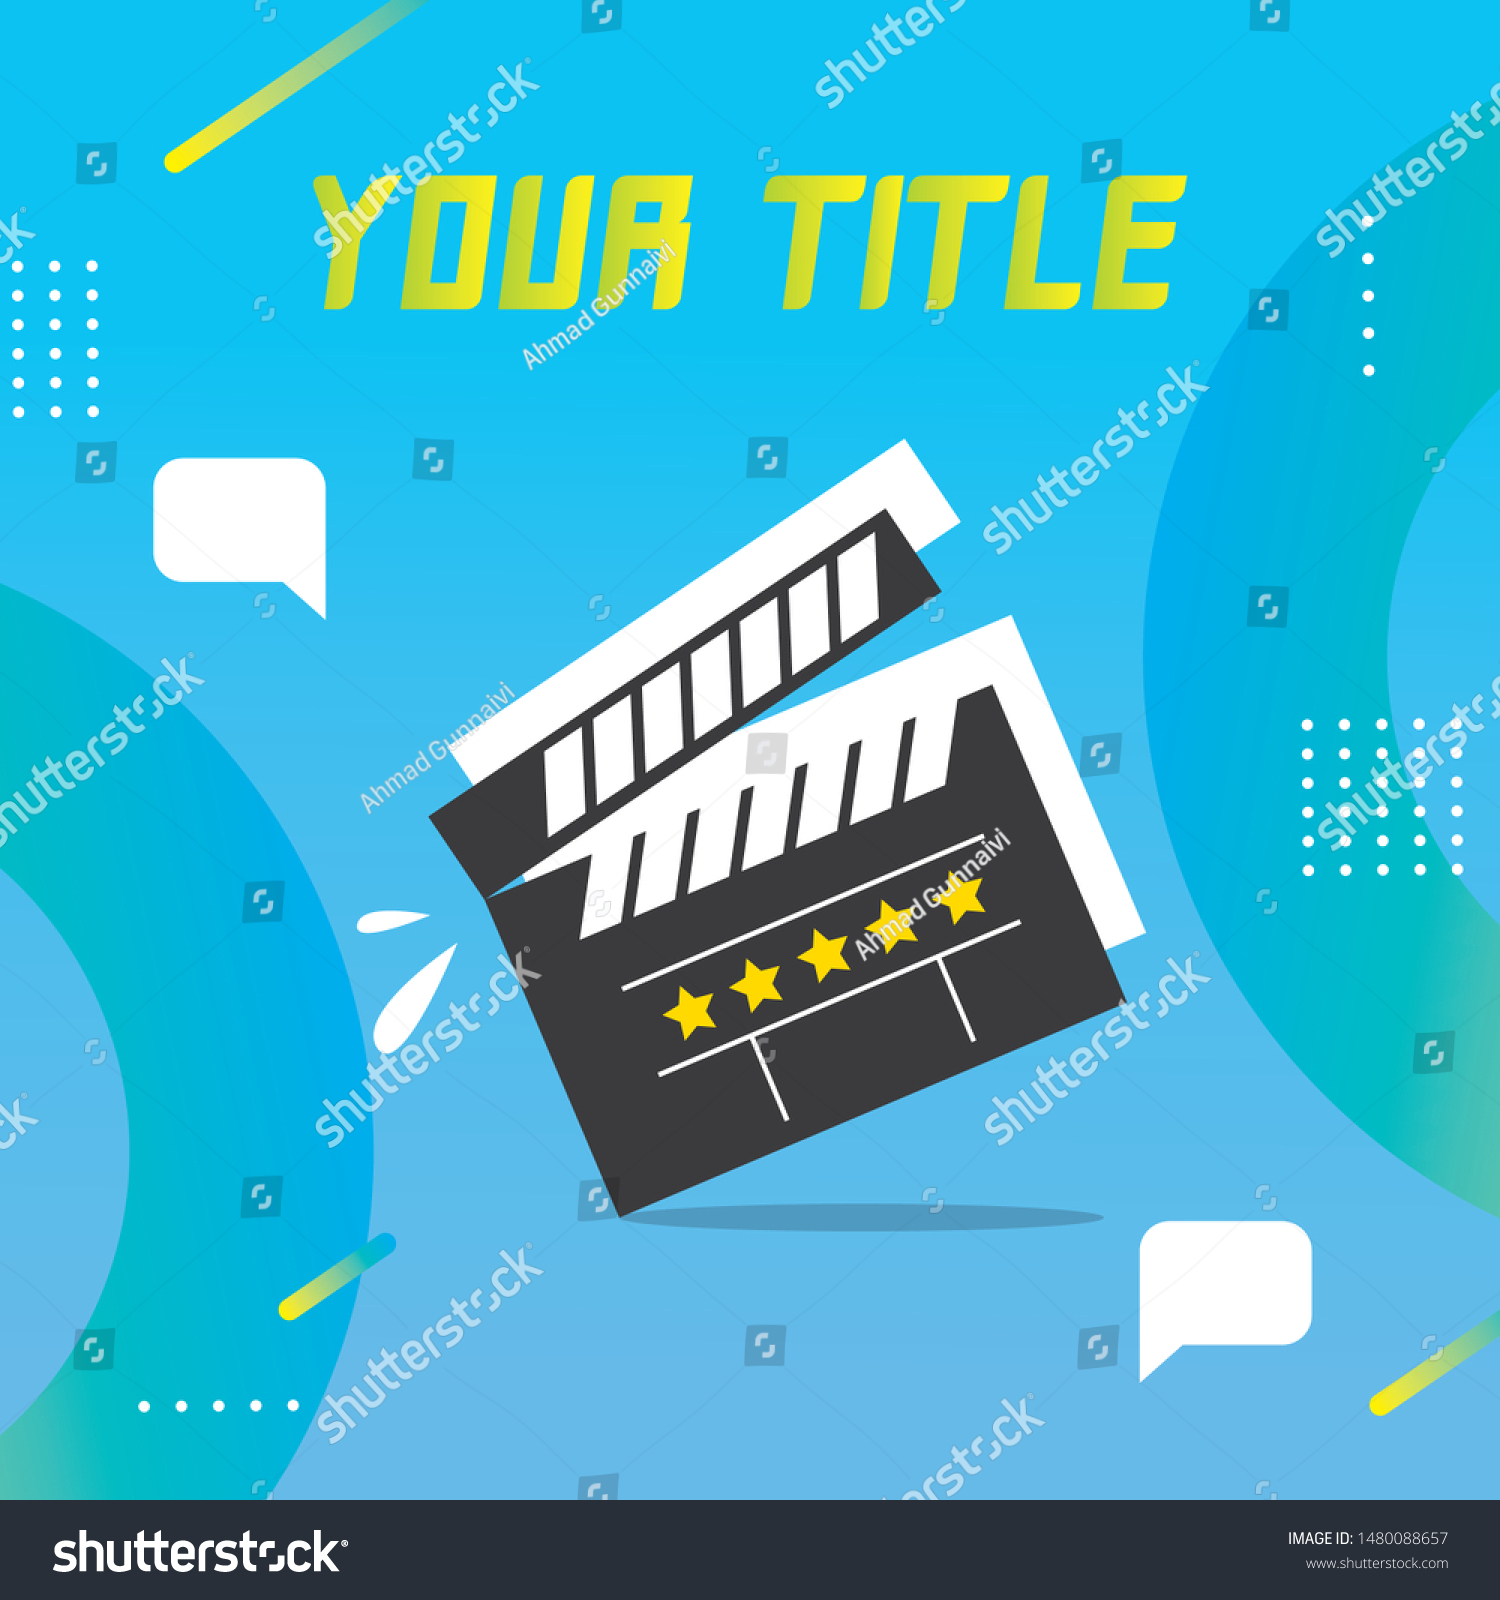 SVG of Short Film Contest or Testimonial Video Contest , Event Invitation with Venue and Time Details for Social Media - Vector svg